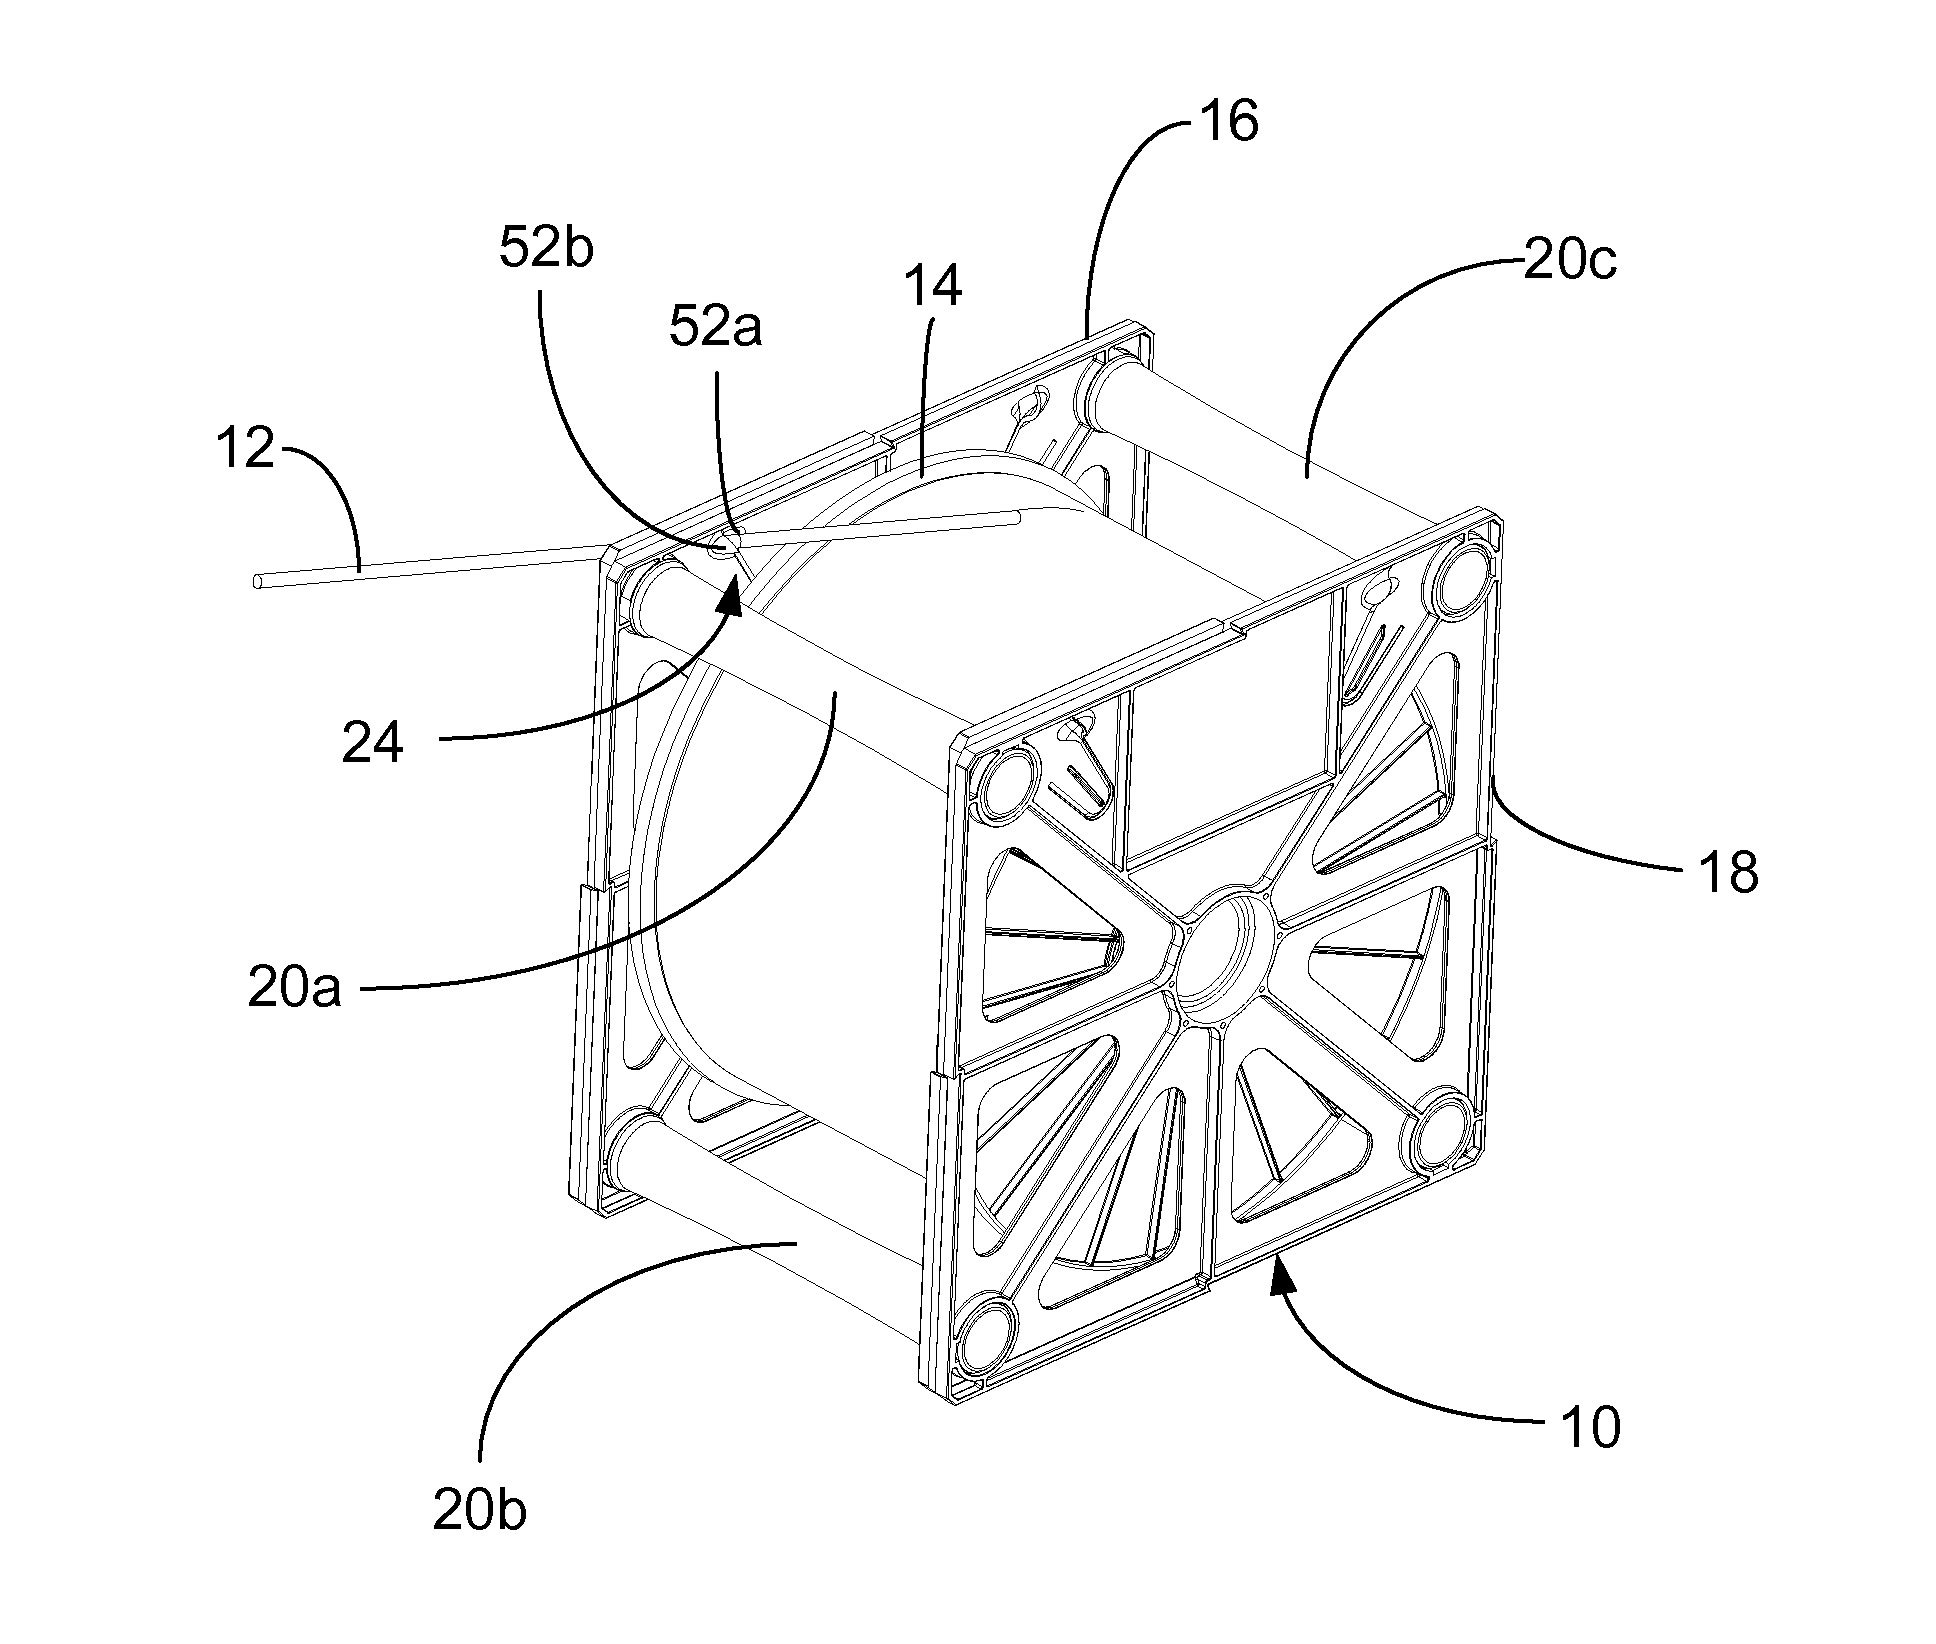 Device for dispensing a telecommunication cable from a reel